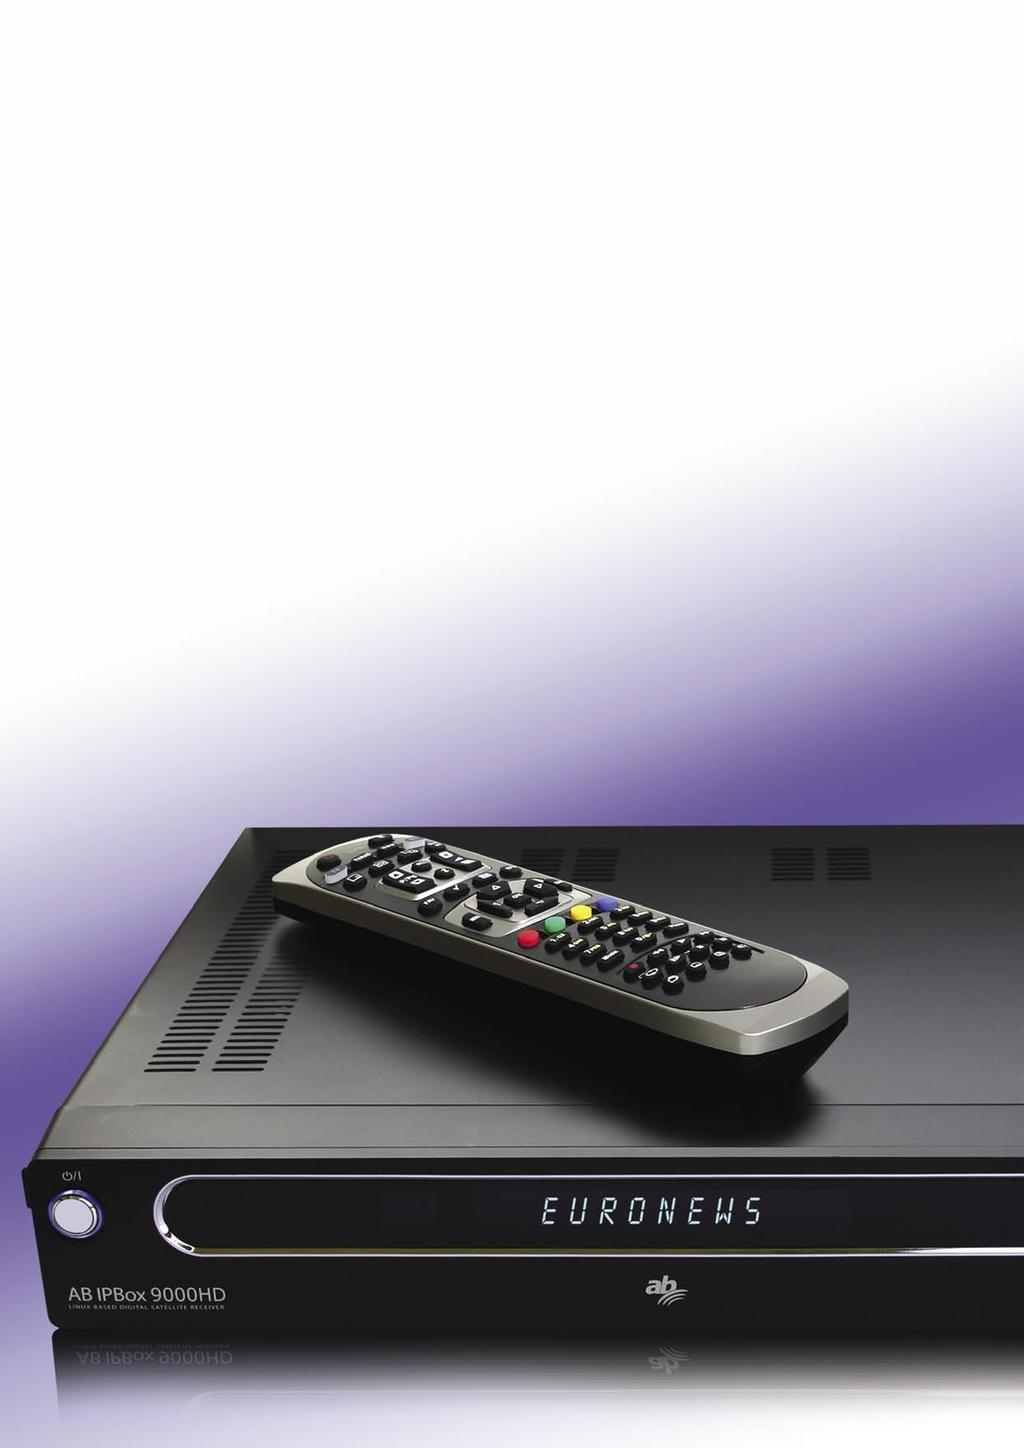 TEST REPORT HDTV Satellite Receiver ABCom IPBOX 9000 HD Plus HDTV via DVB-S, DVB-S2, DVB-C or DVB-T Recent developments and product launches follow a clear trend: PVRs are becoming the norm for HDTV